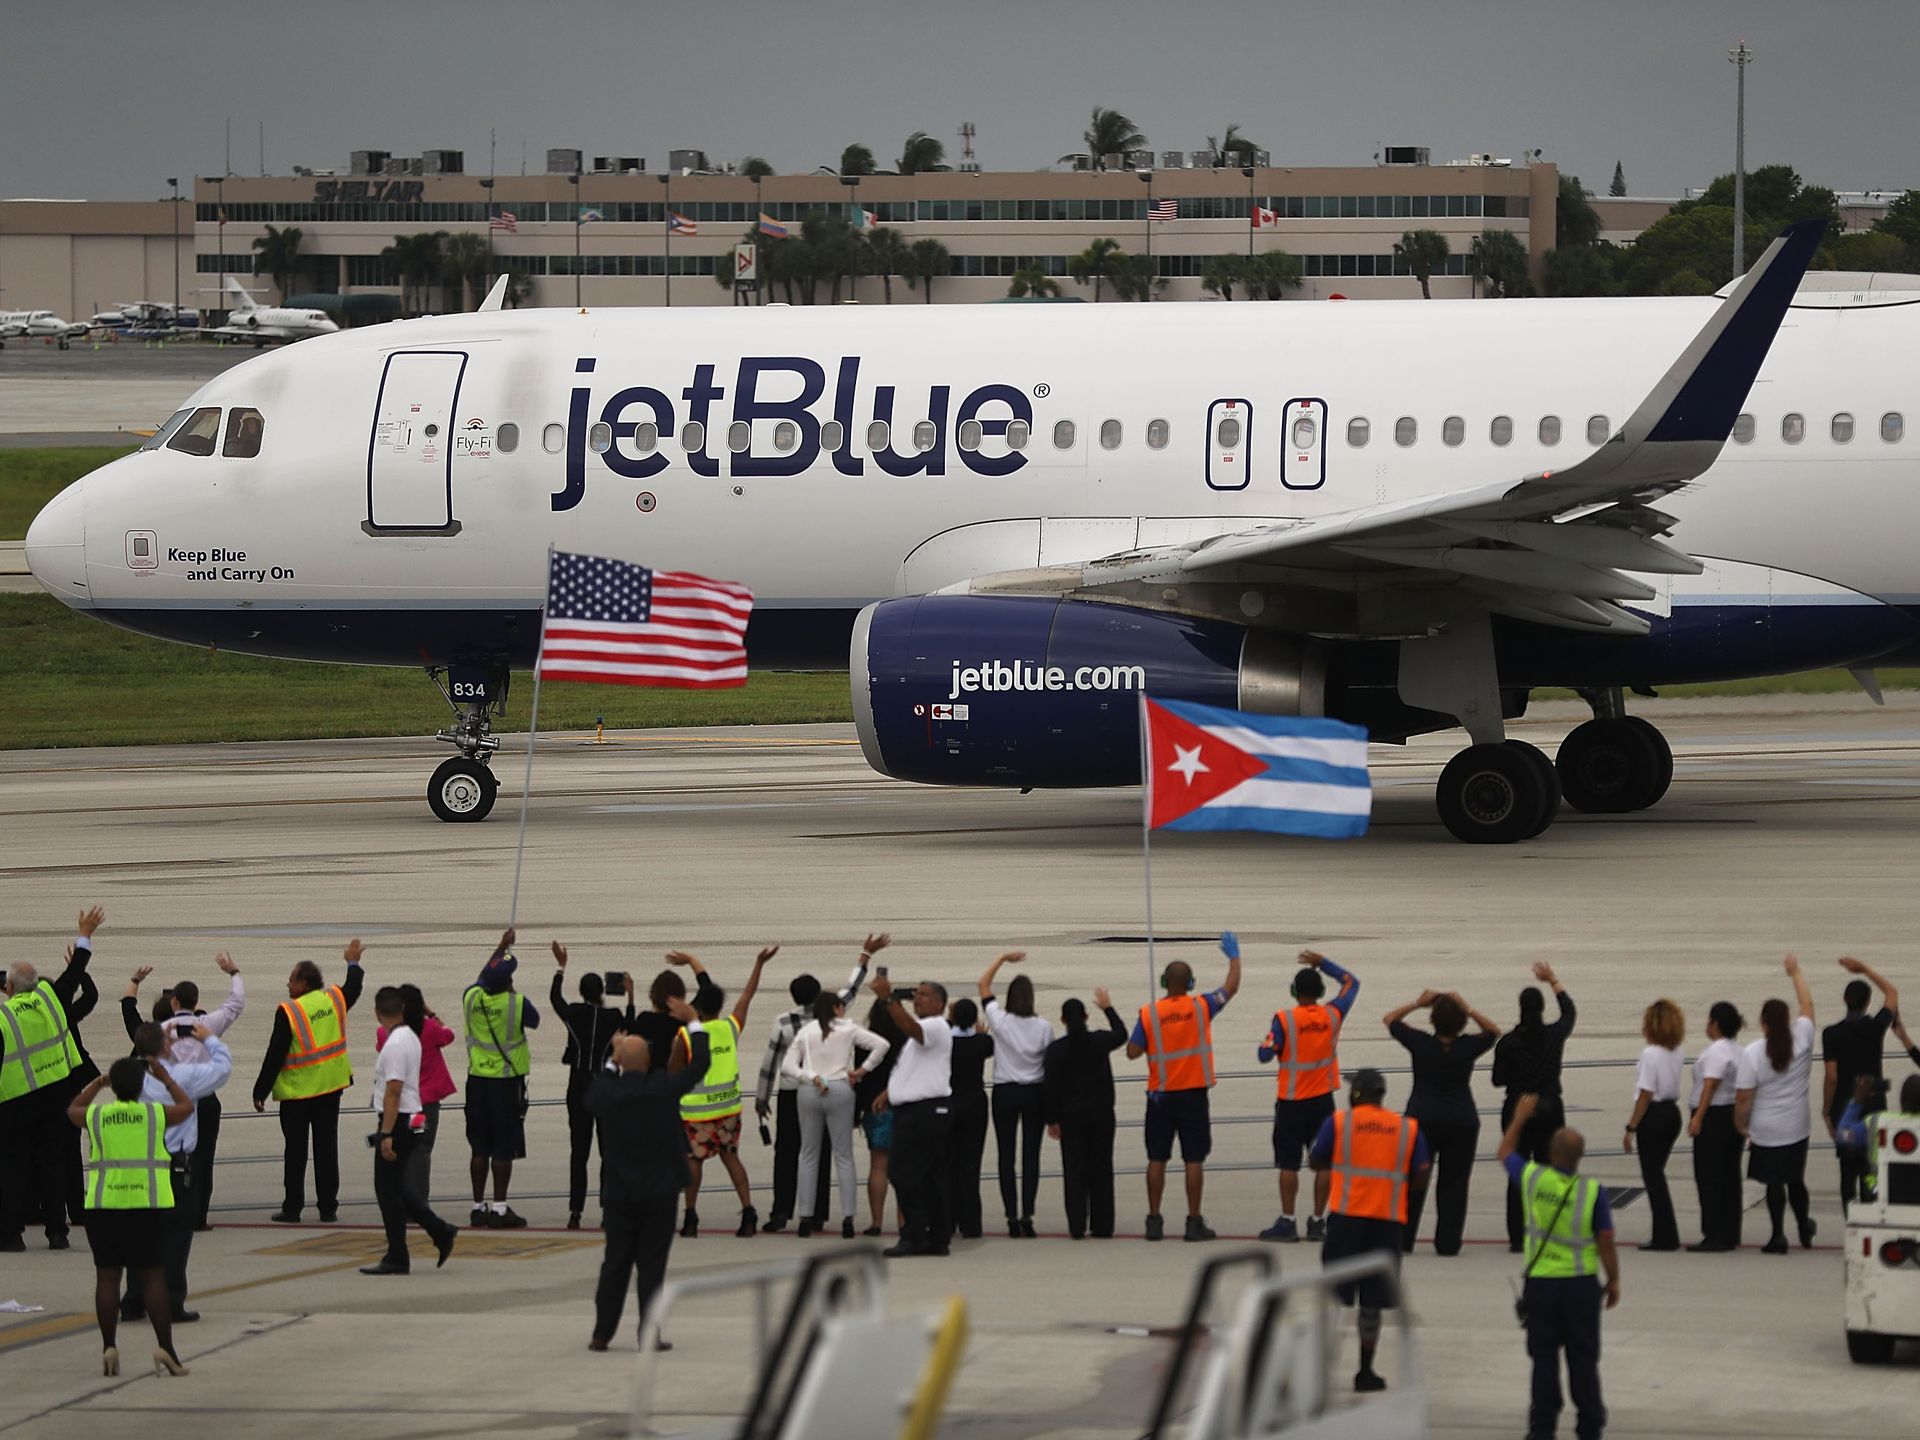 First U.S. commercial flight to Cuba since 1961. Photo by USA Today.